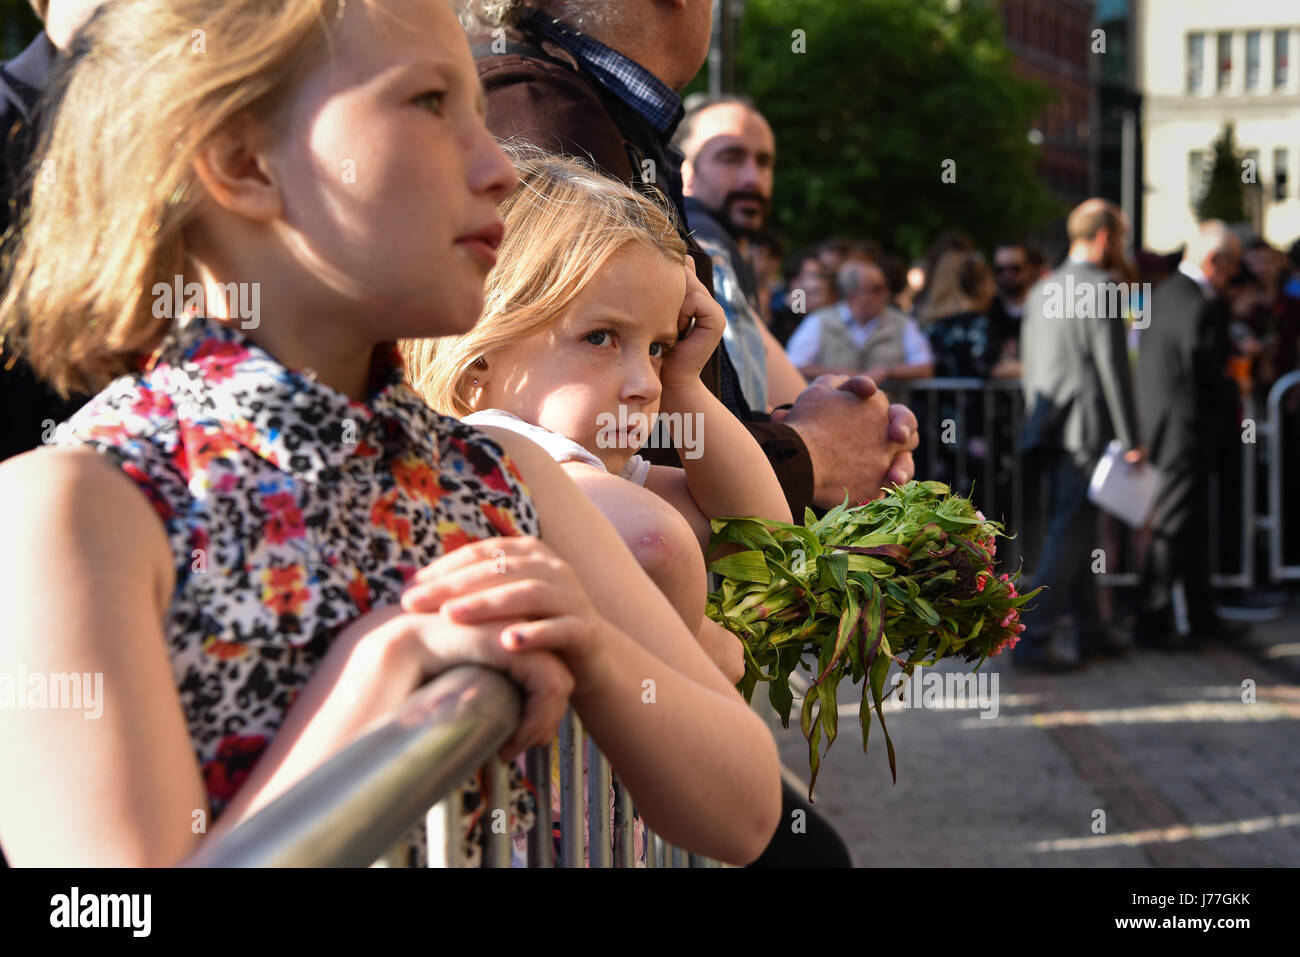 Manchester, UK. 23rd May, 2017. A child holds flowers at a vigil in Manchester's Albert Square to pay respect following the terrorist attack on Manchester Stadium. Manchester Mayor Andy Burnham, Home Secretary Amber Rudd, Labour leader Jeremy Corbyn and Lib Dem leader Tim Farron, alongside city and faith leaders were amongst those who attended. Credit: Jacob Sacks-Jones/Alamy Live News. Stock Photo